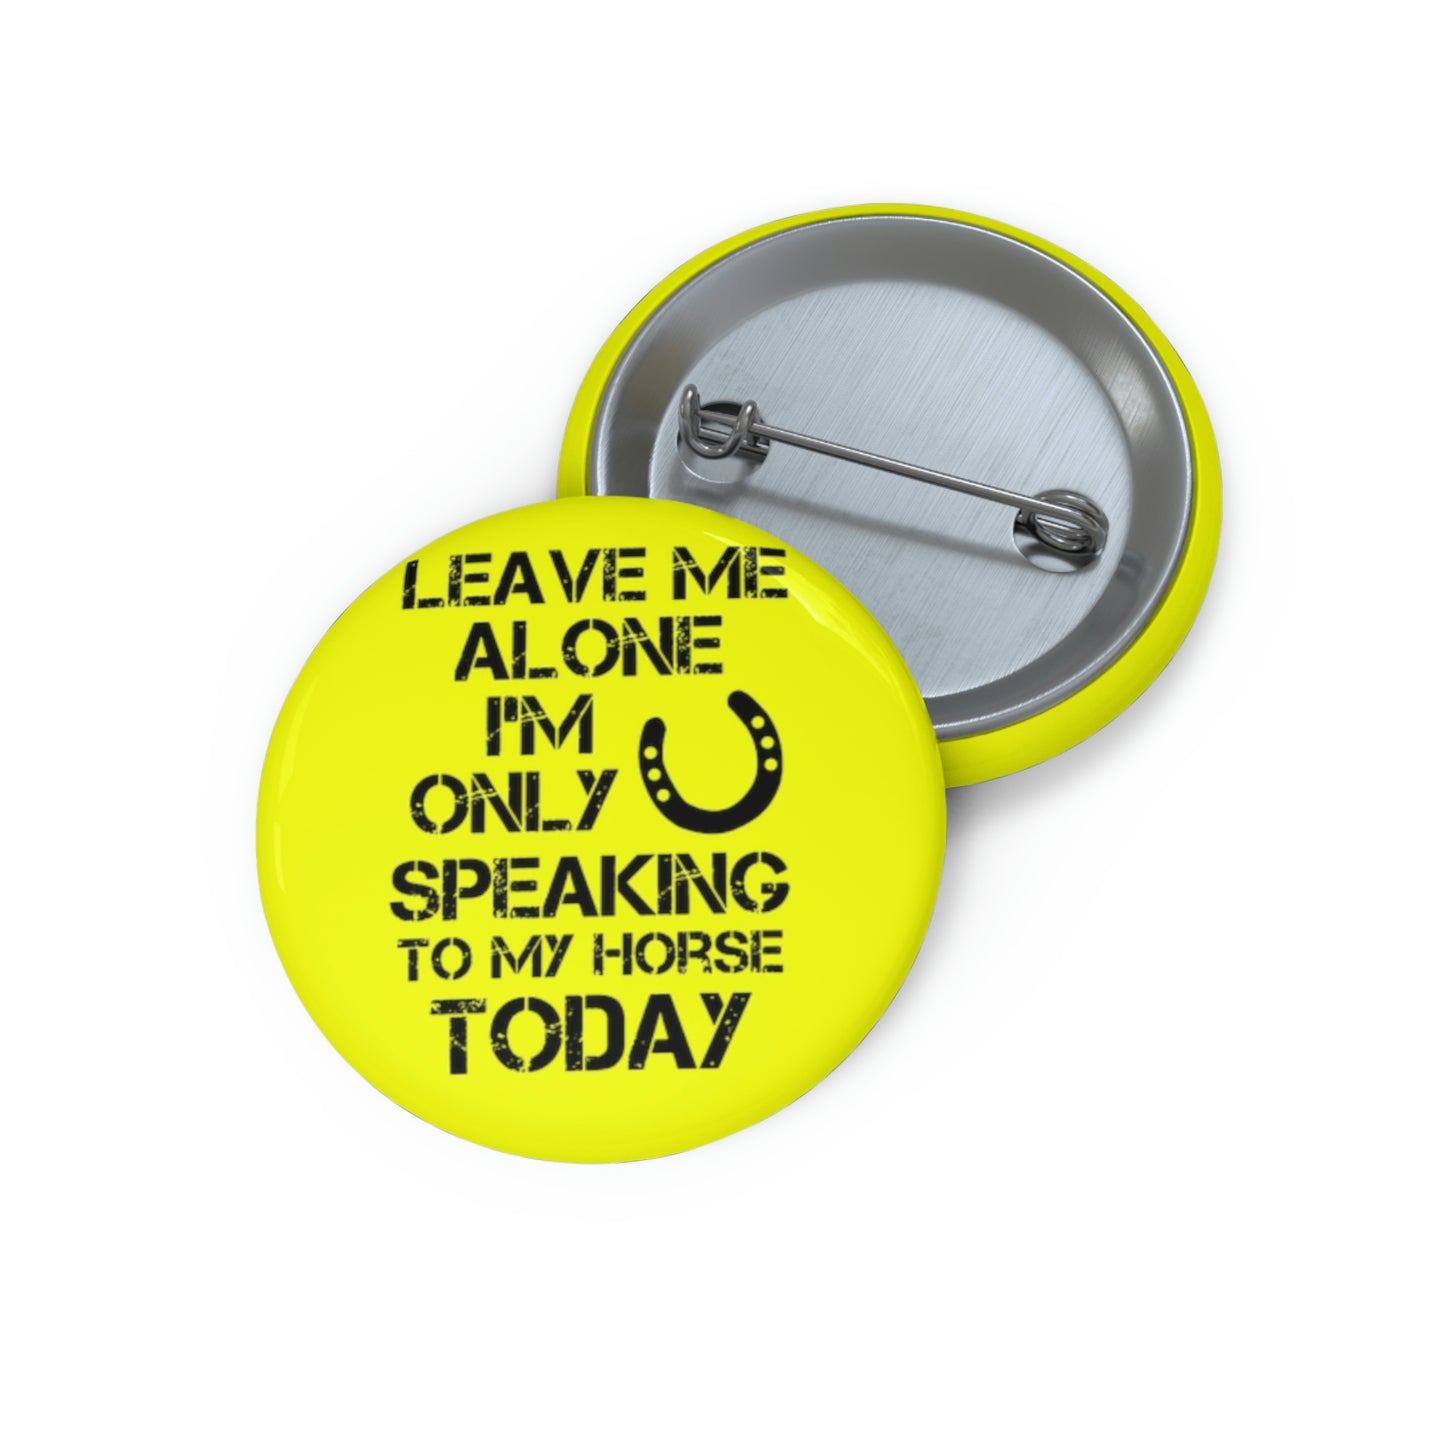 Leave Me Alone - Custom Pin Buttons - Yellow / Black